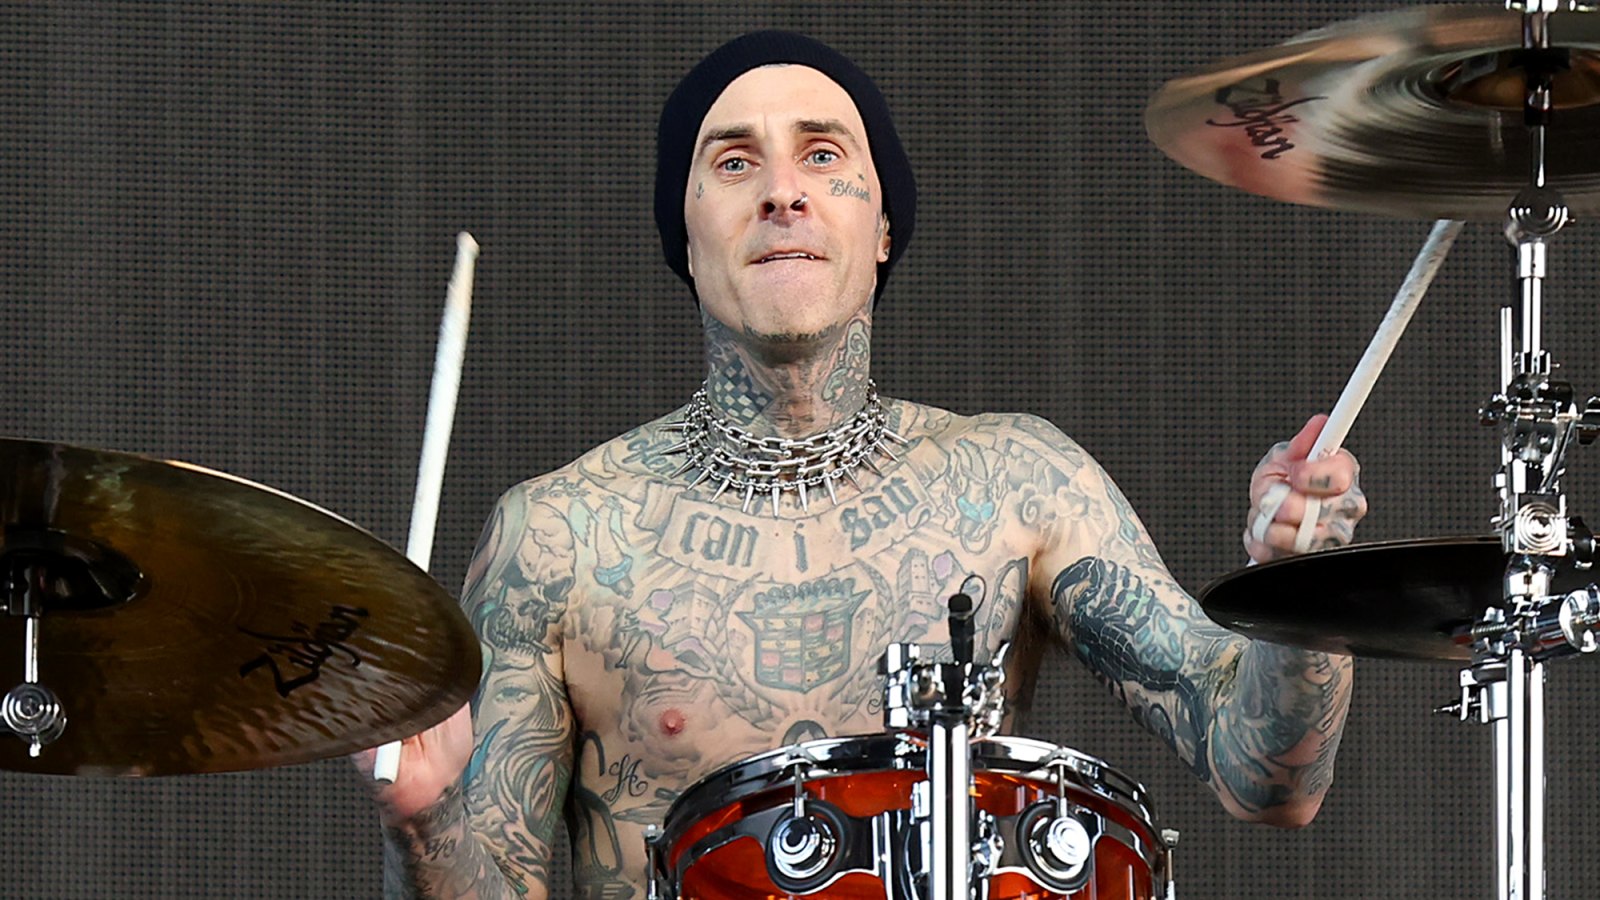 Rocky Makes Sweet Cameo in Travis Barker’s Drum Kit Pic: ‘Tour Was Over, We’d Survived’